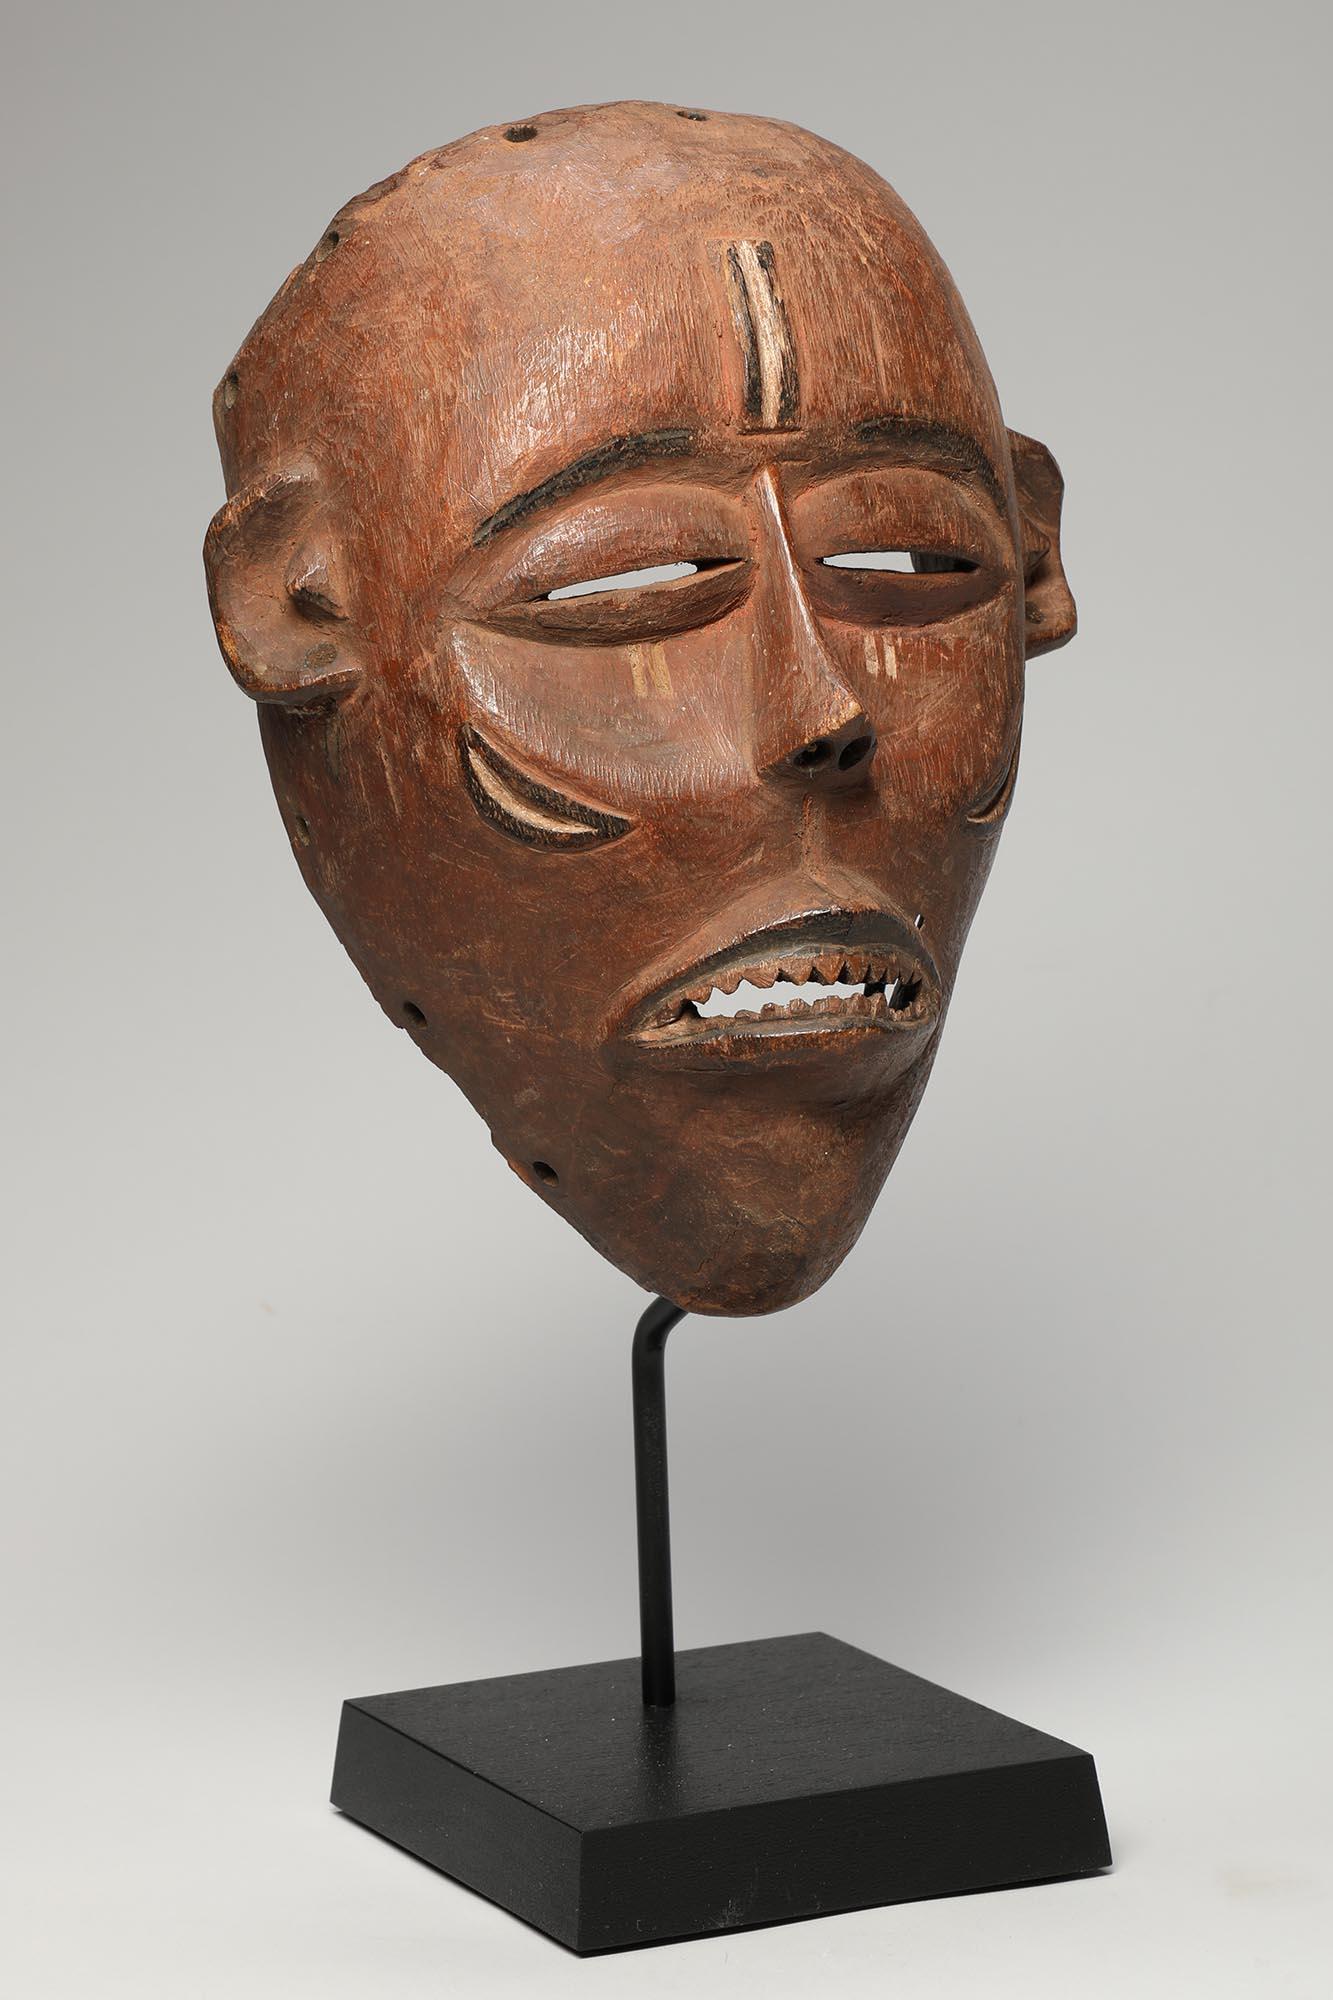 Hand-Carved Early Hardwood Pende Dance Mask Early 20th Century DR Congo African Tribal Art